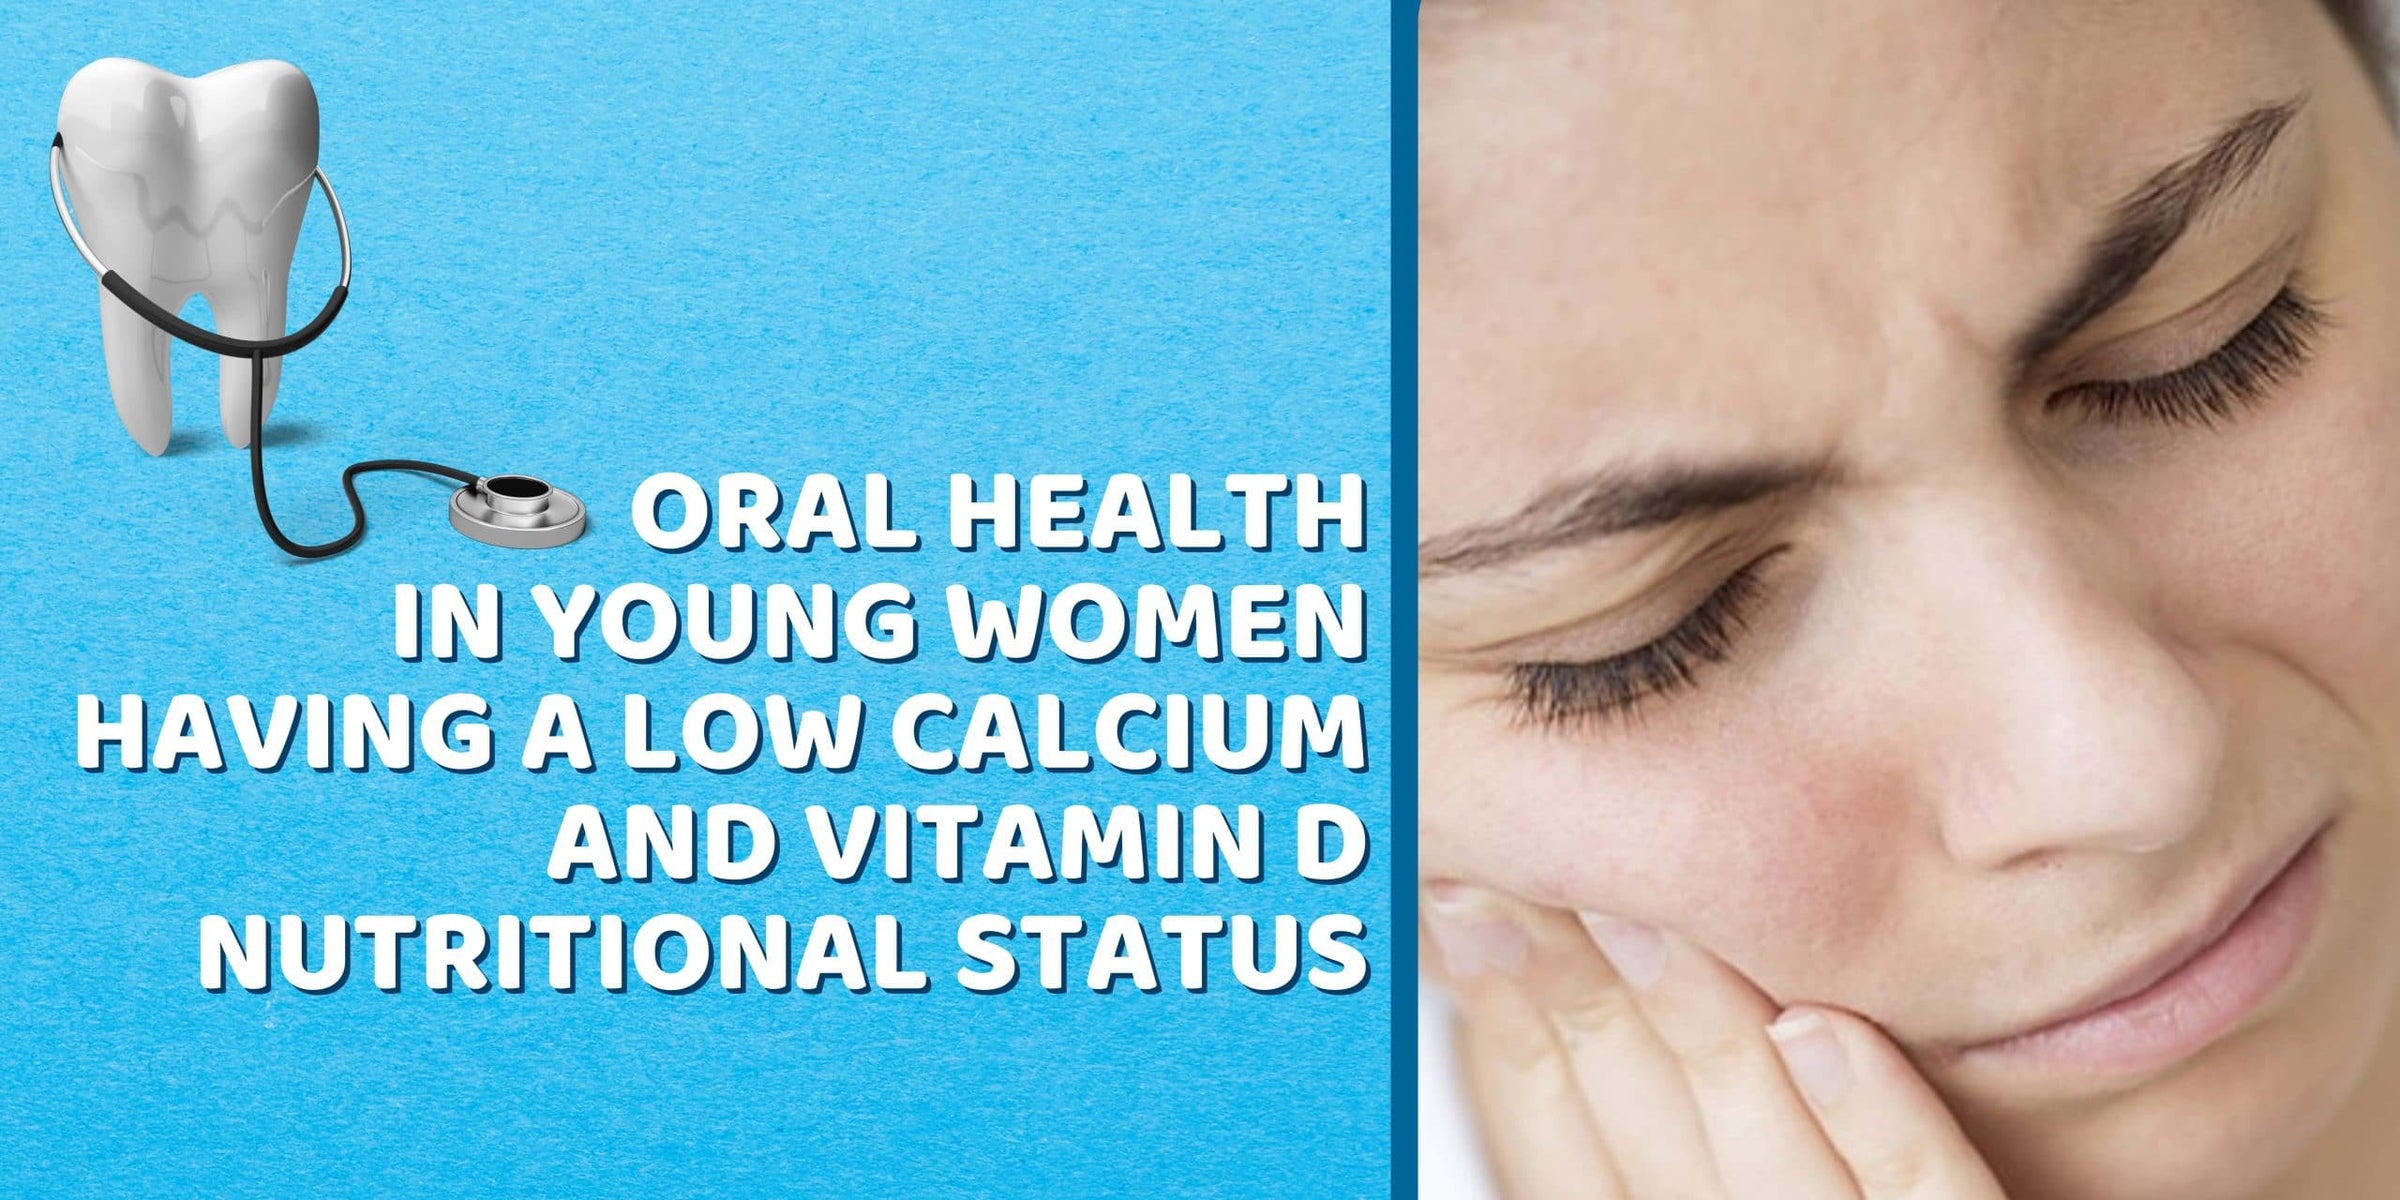 Oral health in young women having a low calcium and vitamin D nutritional status Image